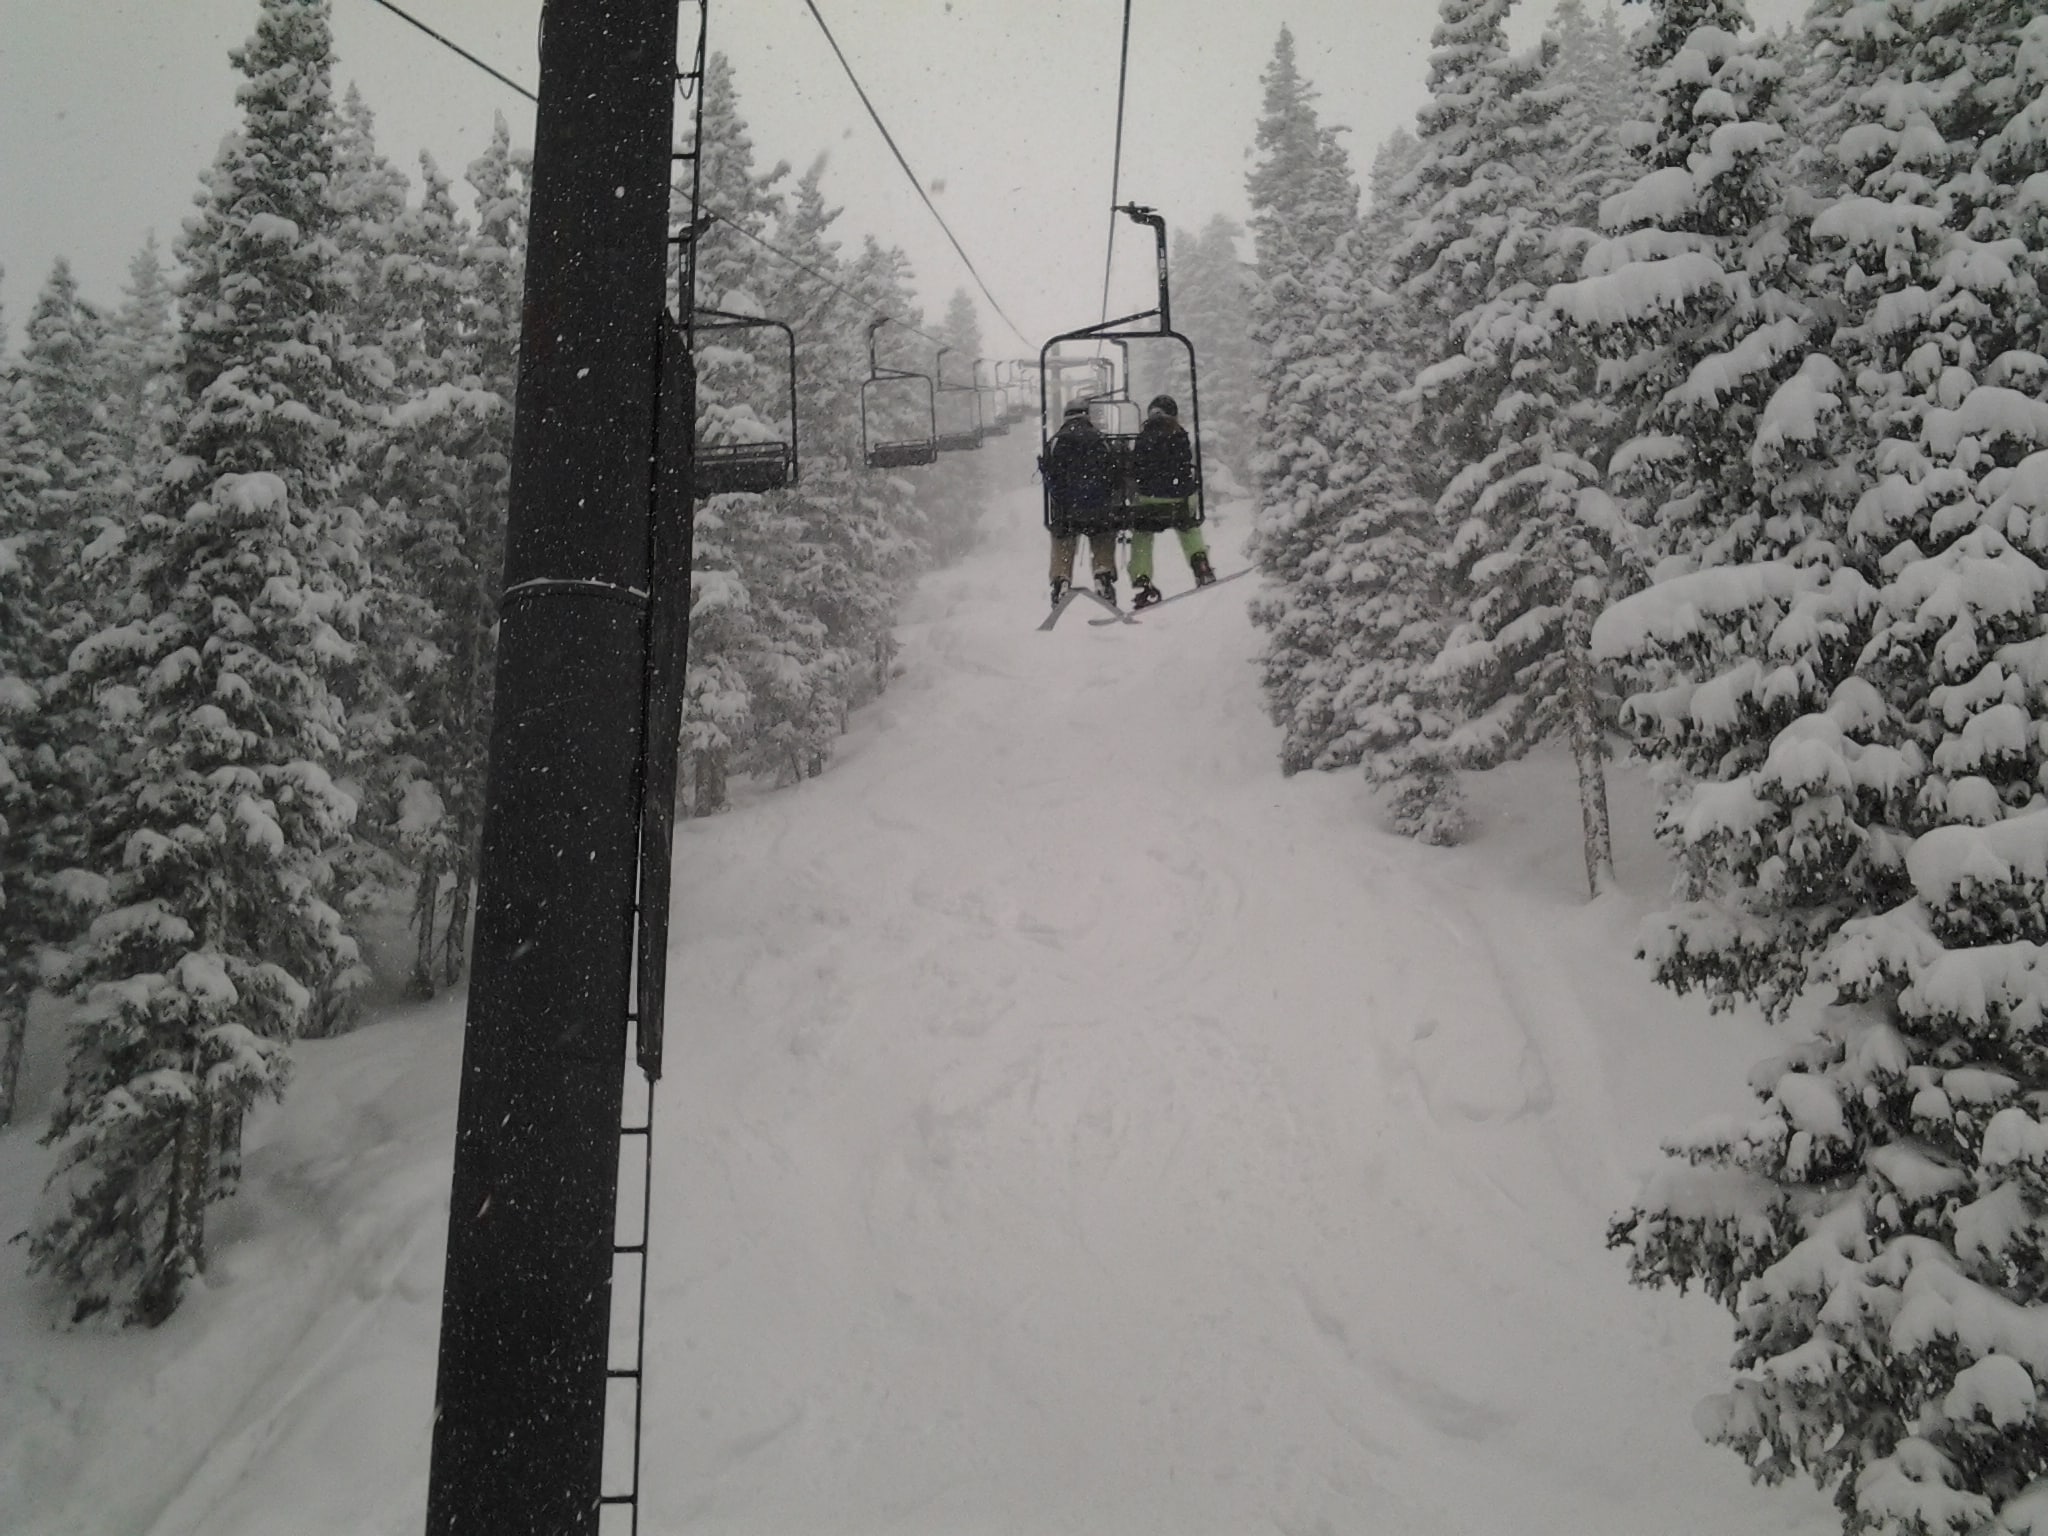 Snow winter day riding up a chairlift with snow covered trees on each side.